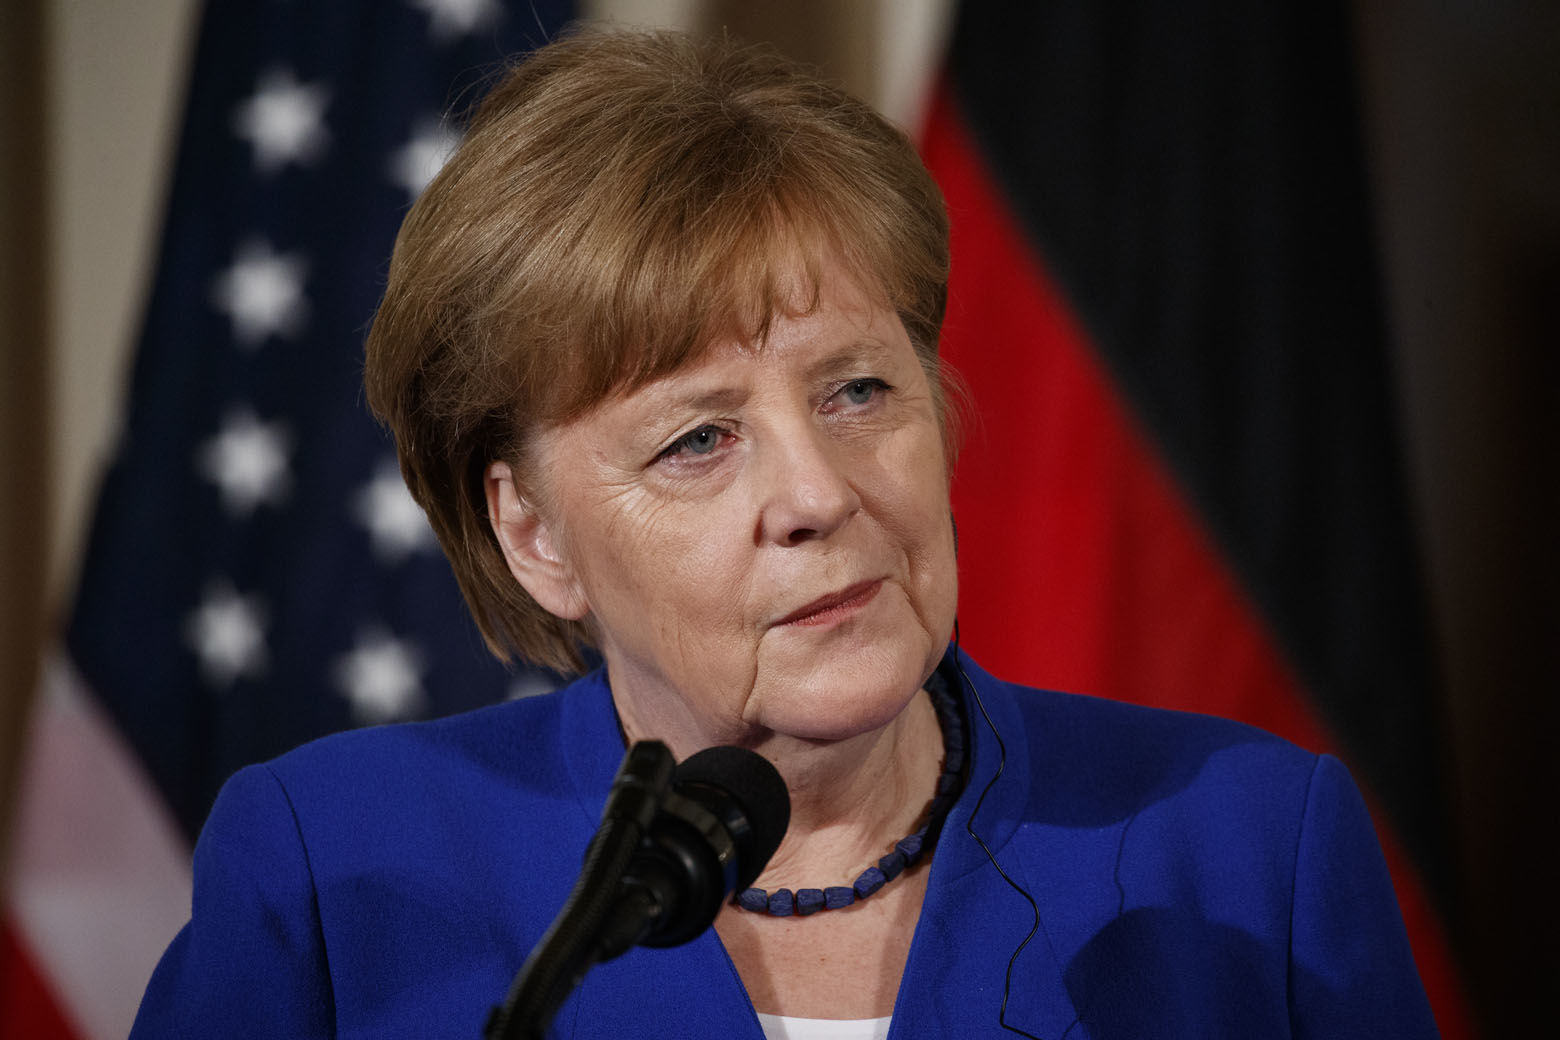 German Chancellor Angela Merkel listens to a question during a news conference with President Donald Trump in the East Room of the White House, Friday, April 27, 2018, in Washington. (AP Photo/Evan Vucci)